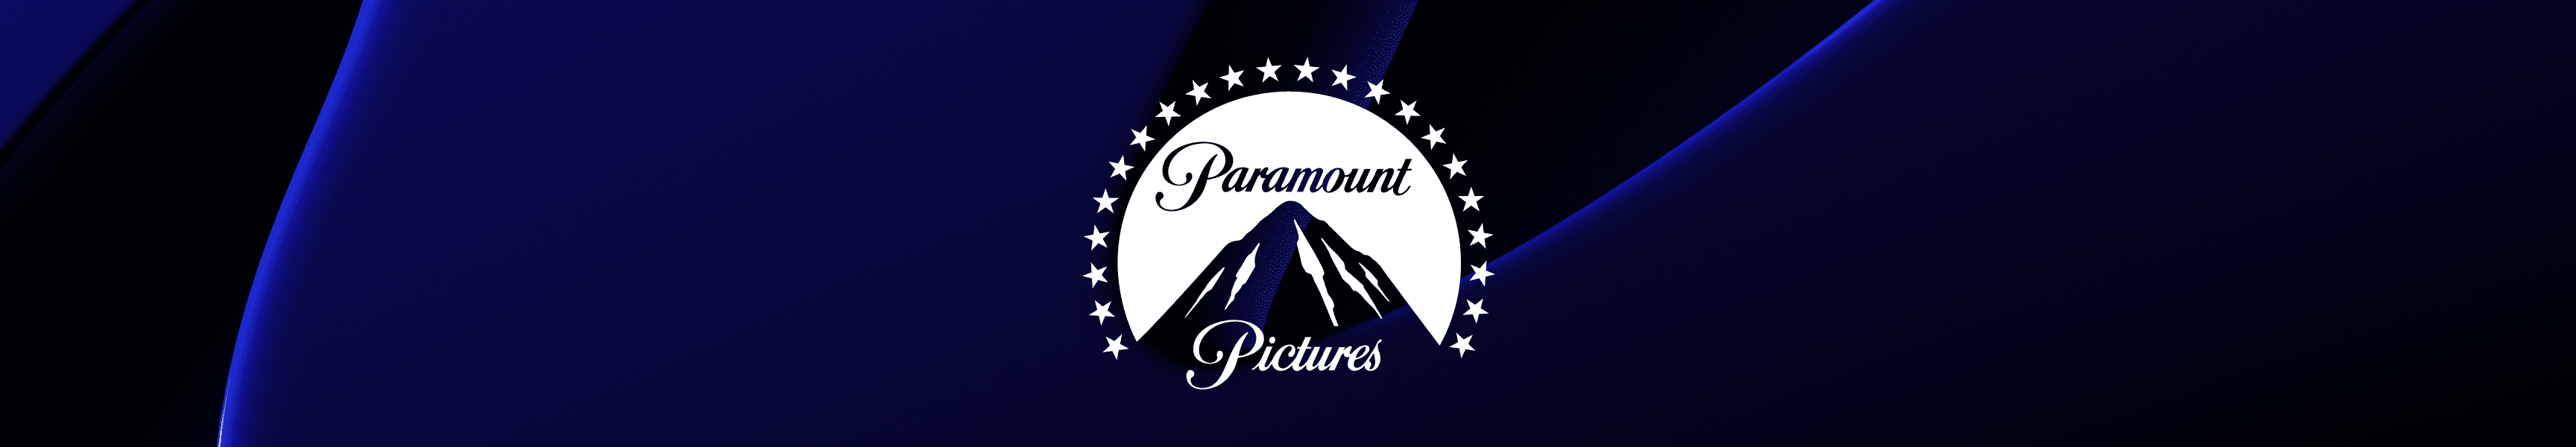 Paramount Pictures Patchs